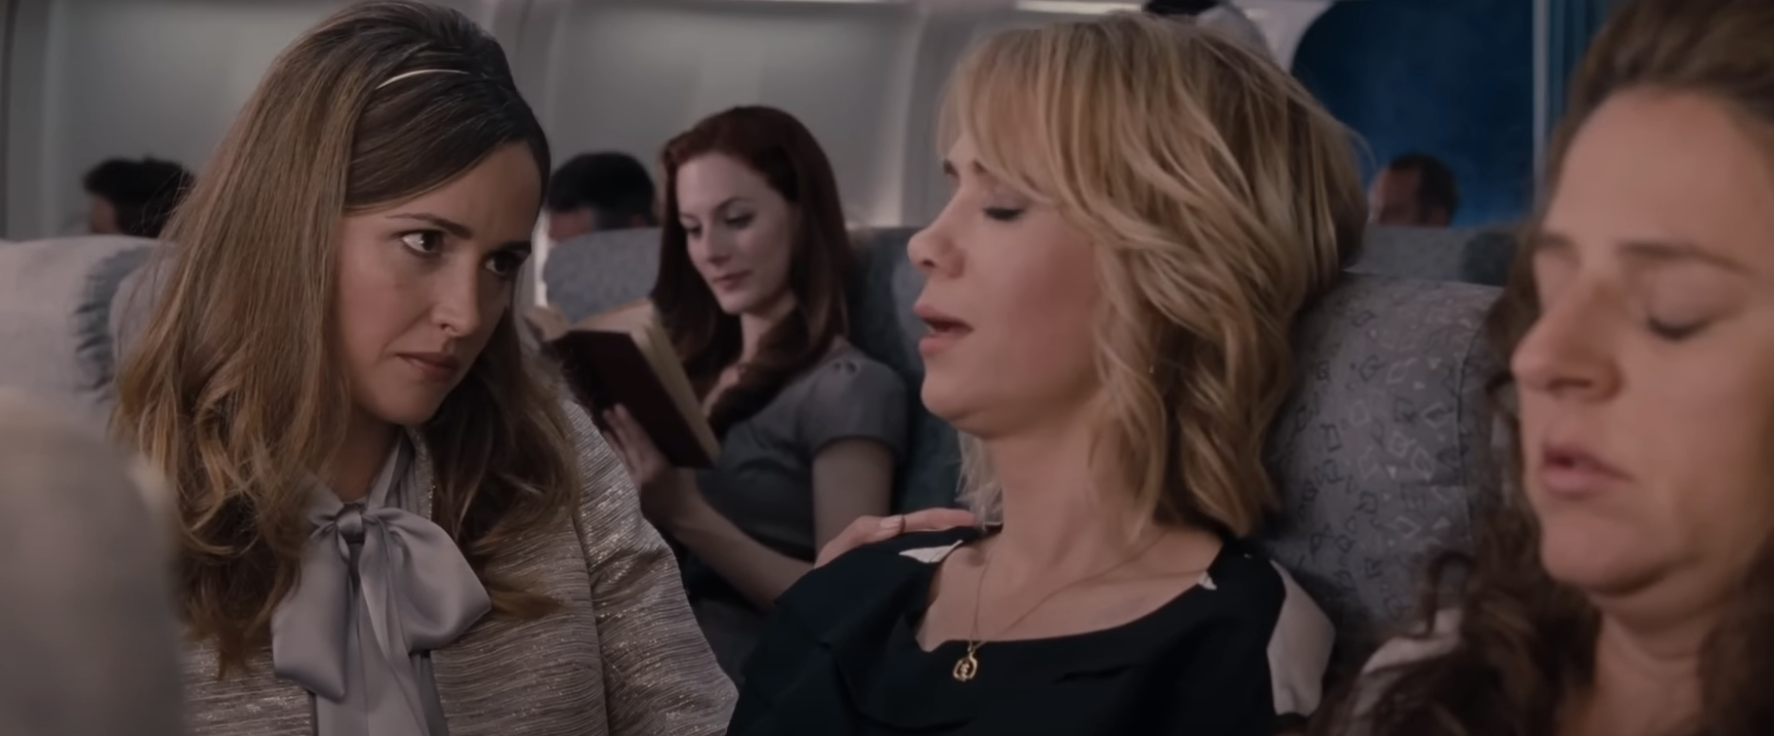 Characters from the film &quot;Bridesmaids&quot; seated on a plane with humorously distraught expressions